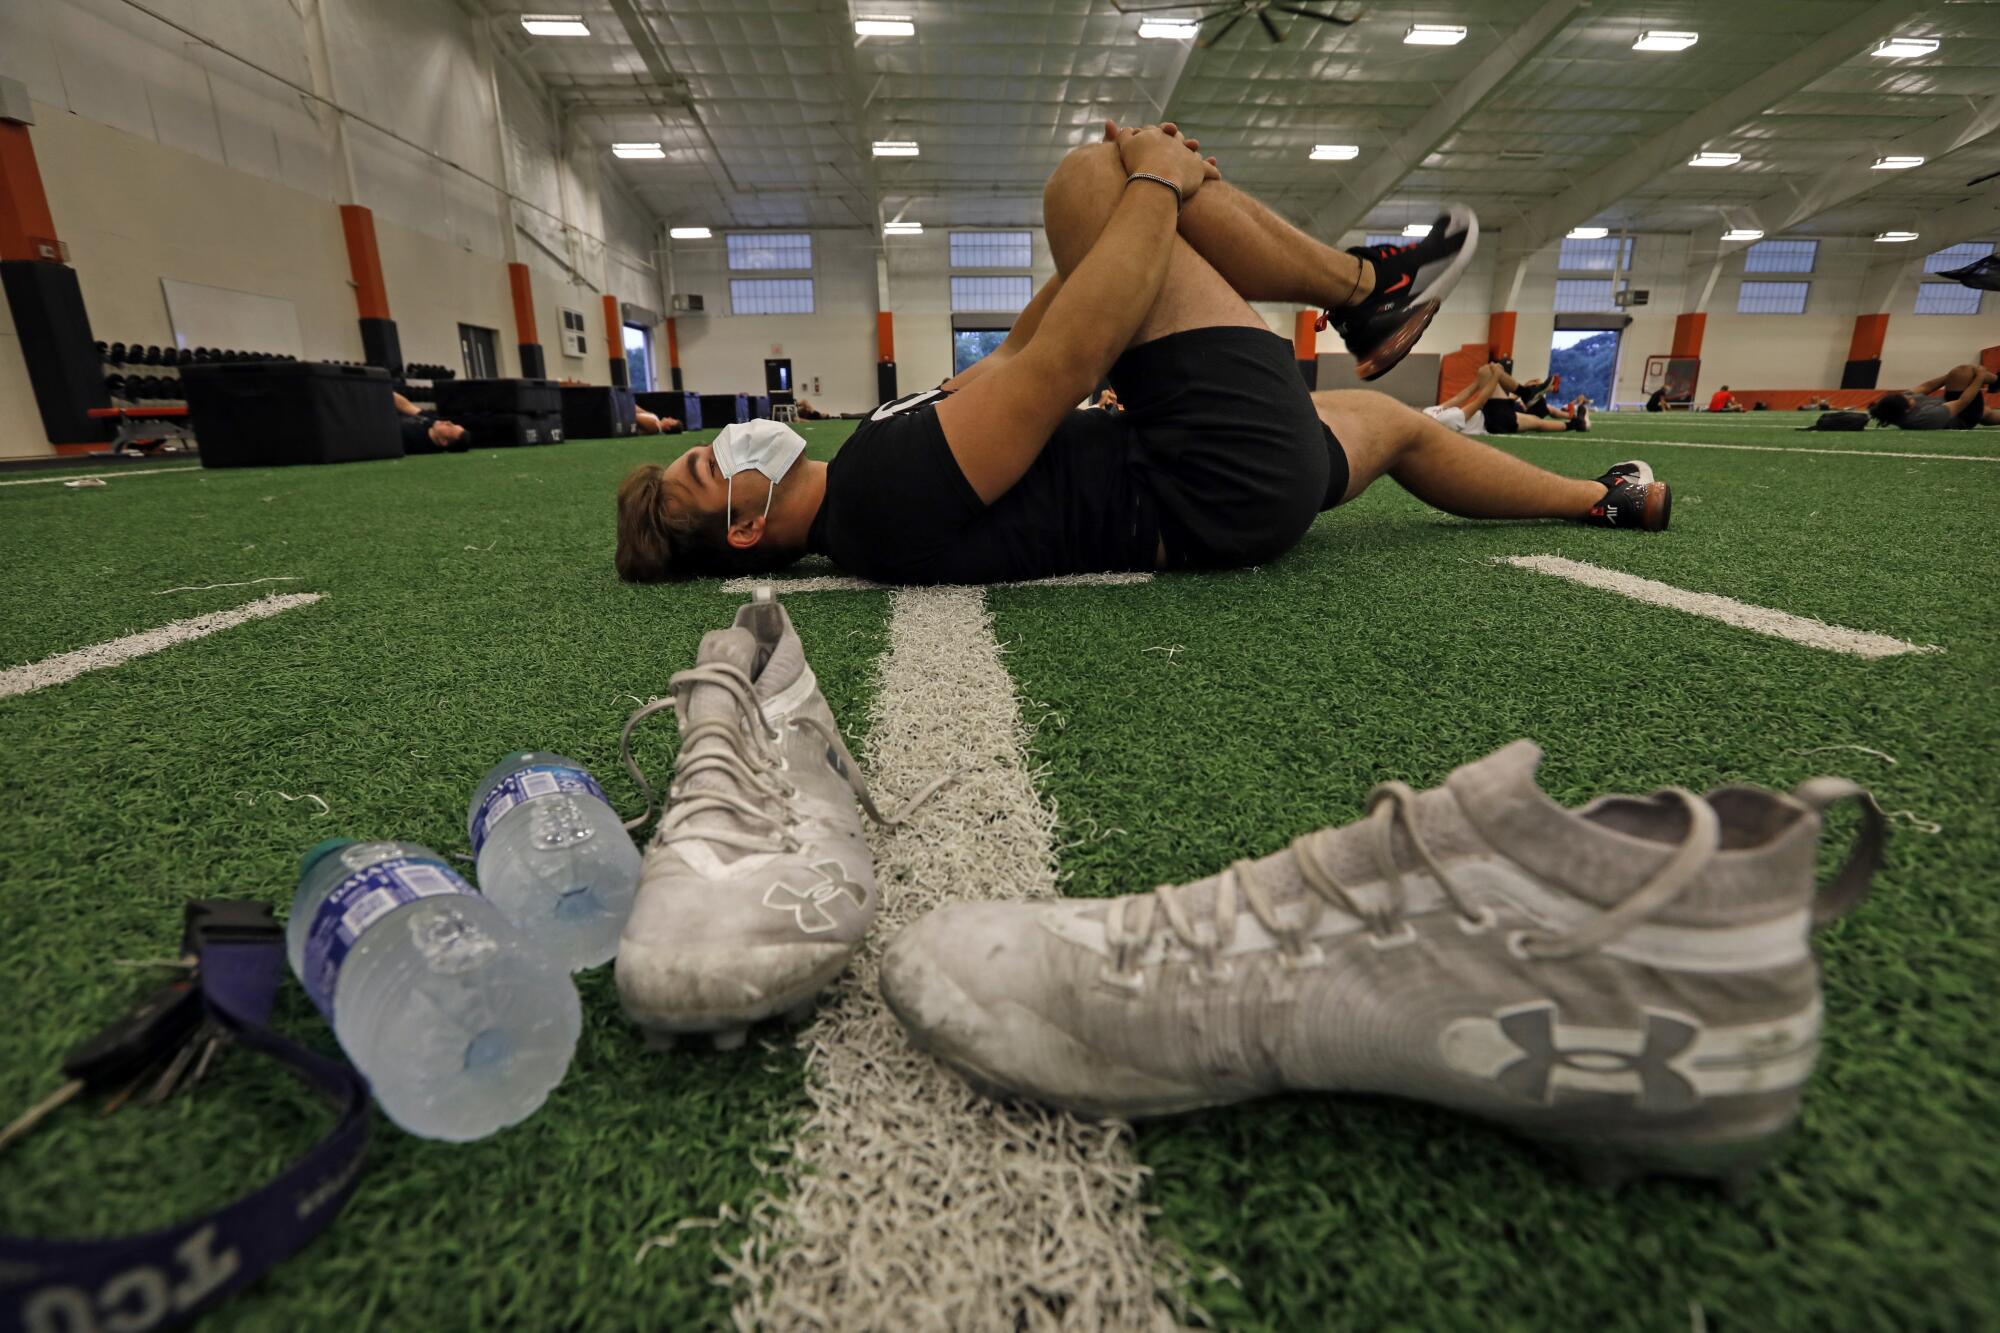 Kyle Thompson wears a mask while stretching during football practice this week at Aledo High School.